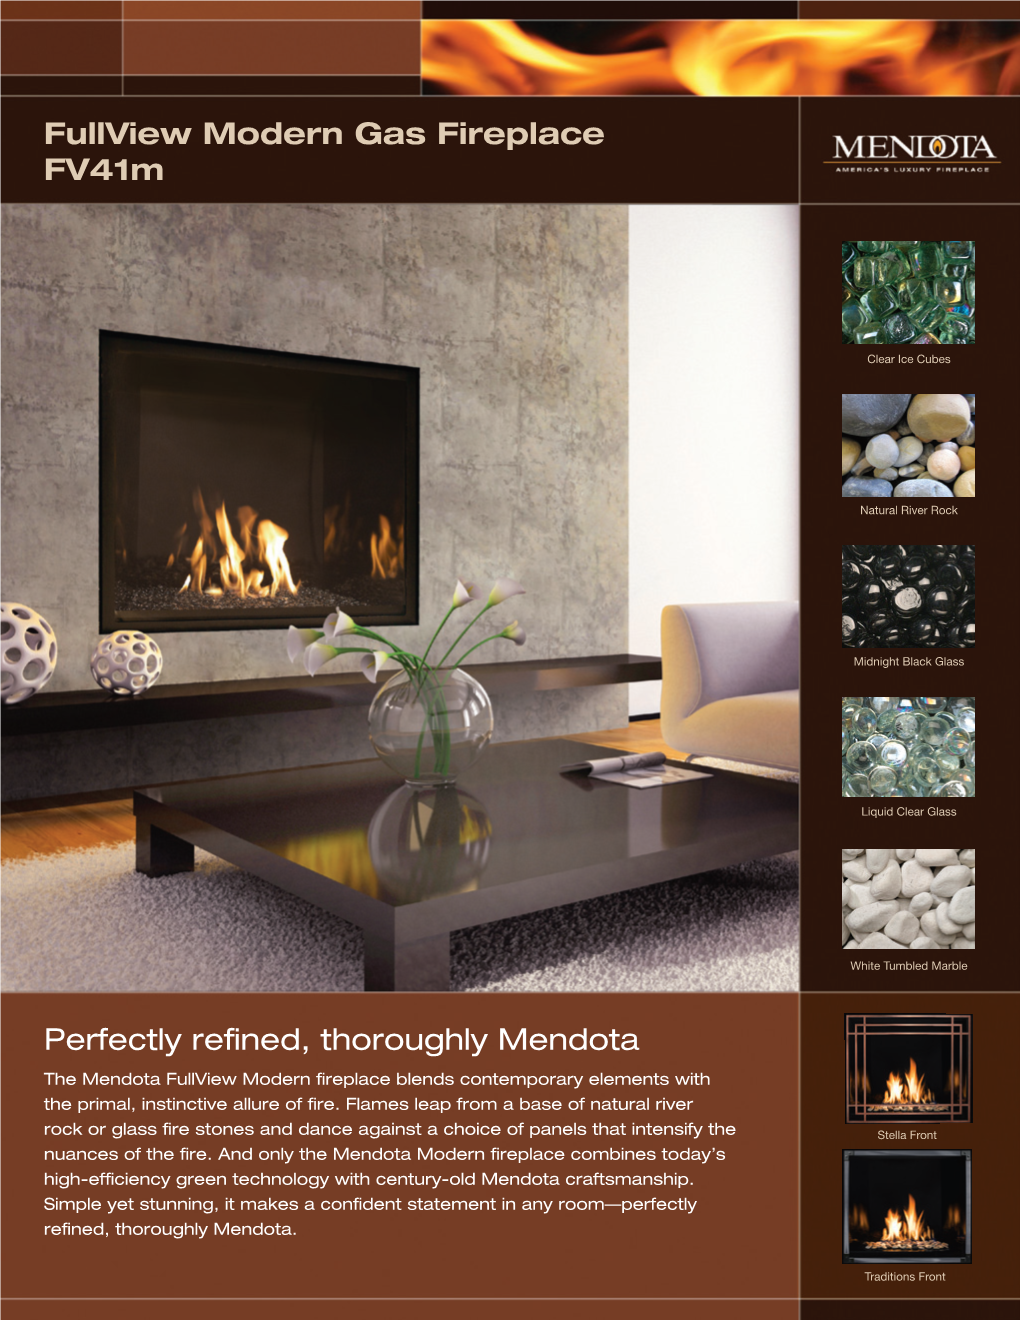 Perfectly Refined, Thoroughly Mendota Fullview Modern Gas Fireplace Fv41m